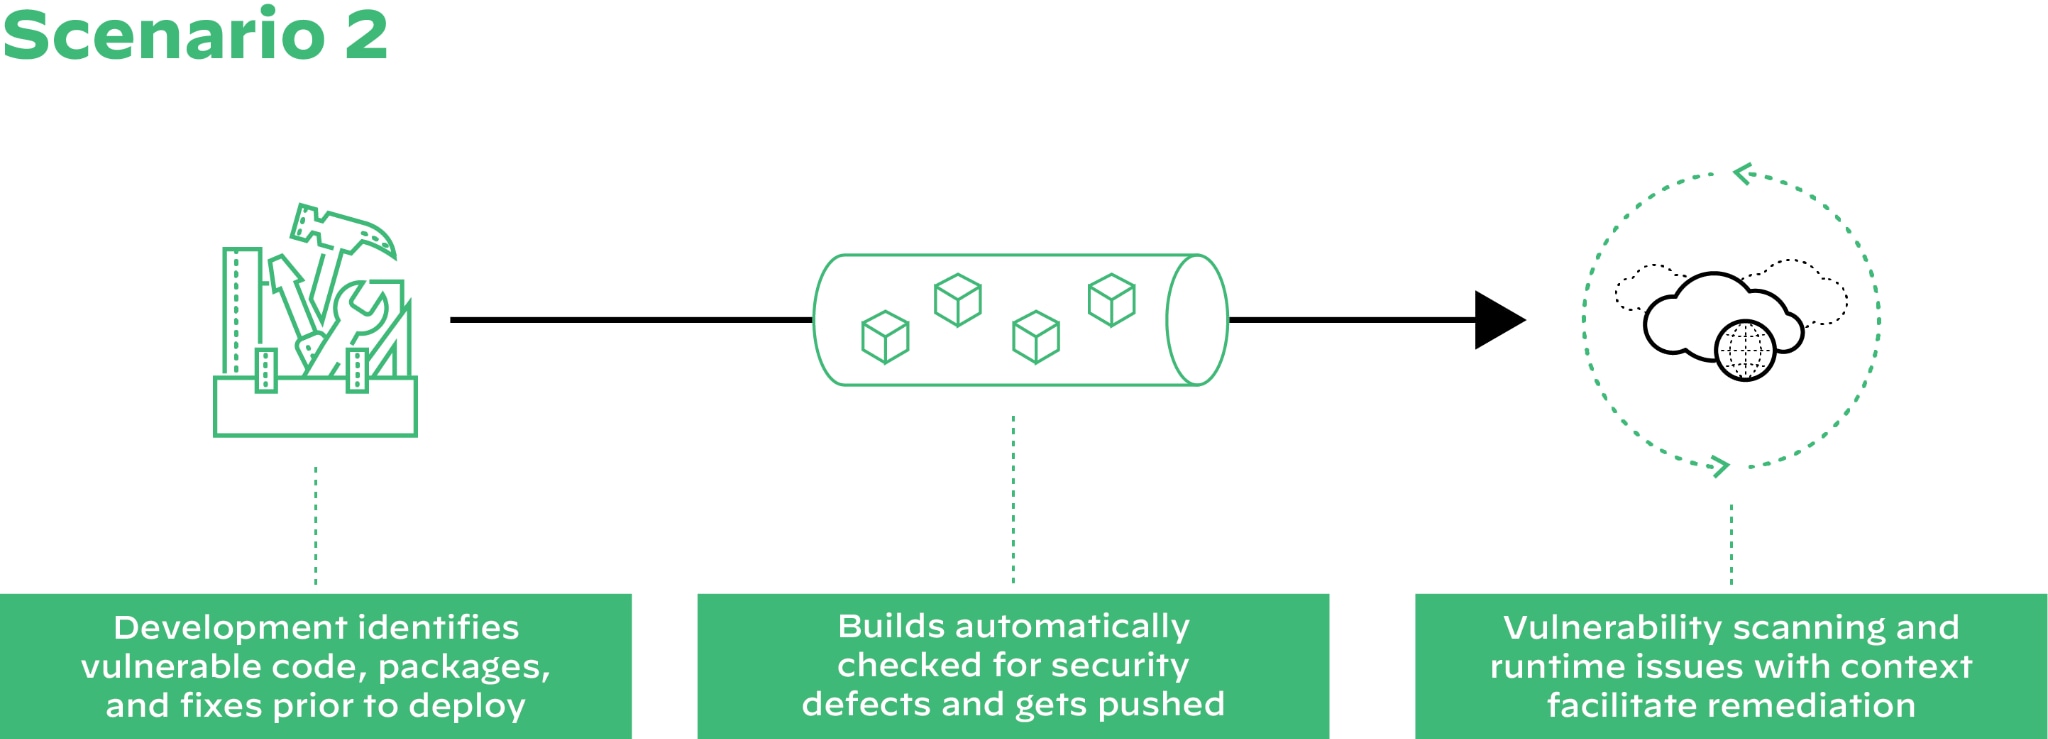 Another approach to software development, as illustrated in the diagram, is: 1) Development identifies vulnerable code, packages and fixes prior to deploy; 2) Builds automatically checked for security defects and gets pushed; 3) Vulnerability scanning and runtime issues with context facilitate remediation. 